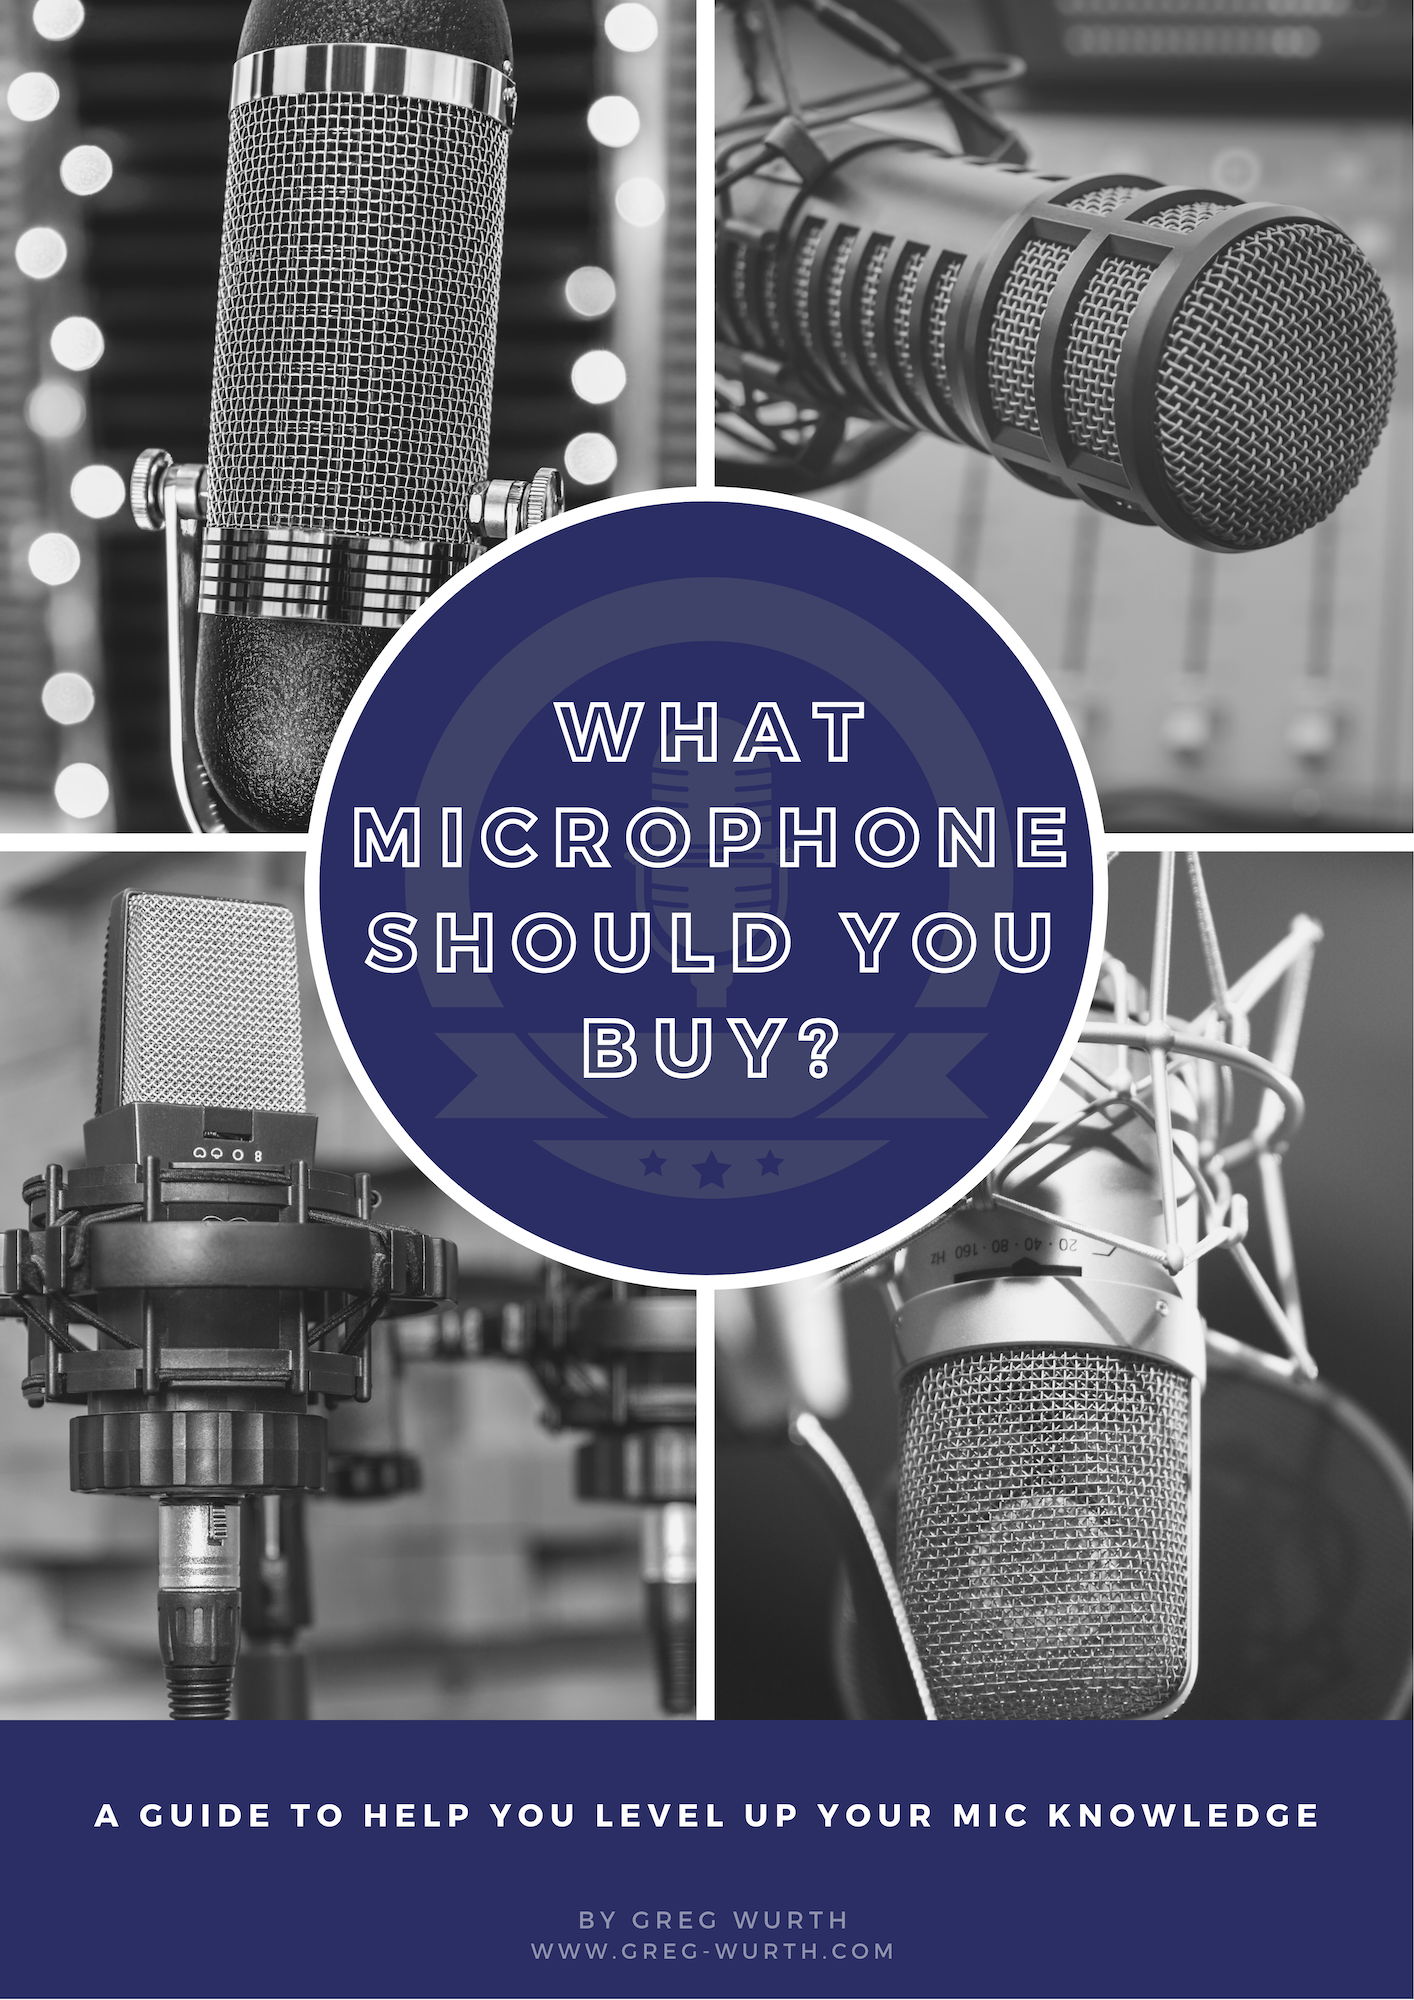 What Microphone Should You Buy? - by Greg Wurth